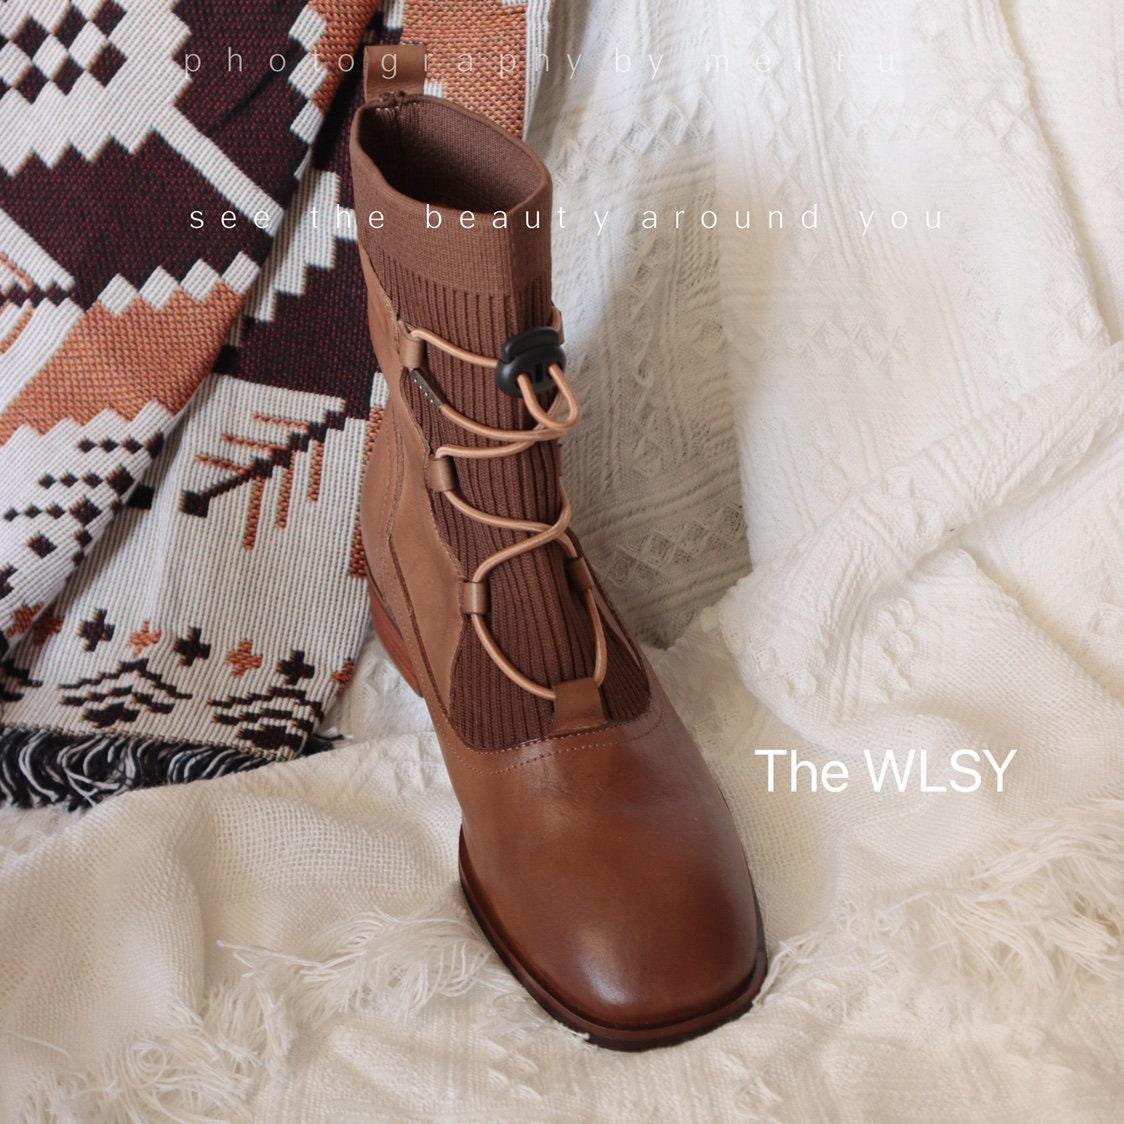 Handcrafted Women Genuine Leather Boots Ankle Square Heels Brown Punk Goth Lace Up Handmade Round Toe Big Size 5 AU/36 EU Shoes Woman